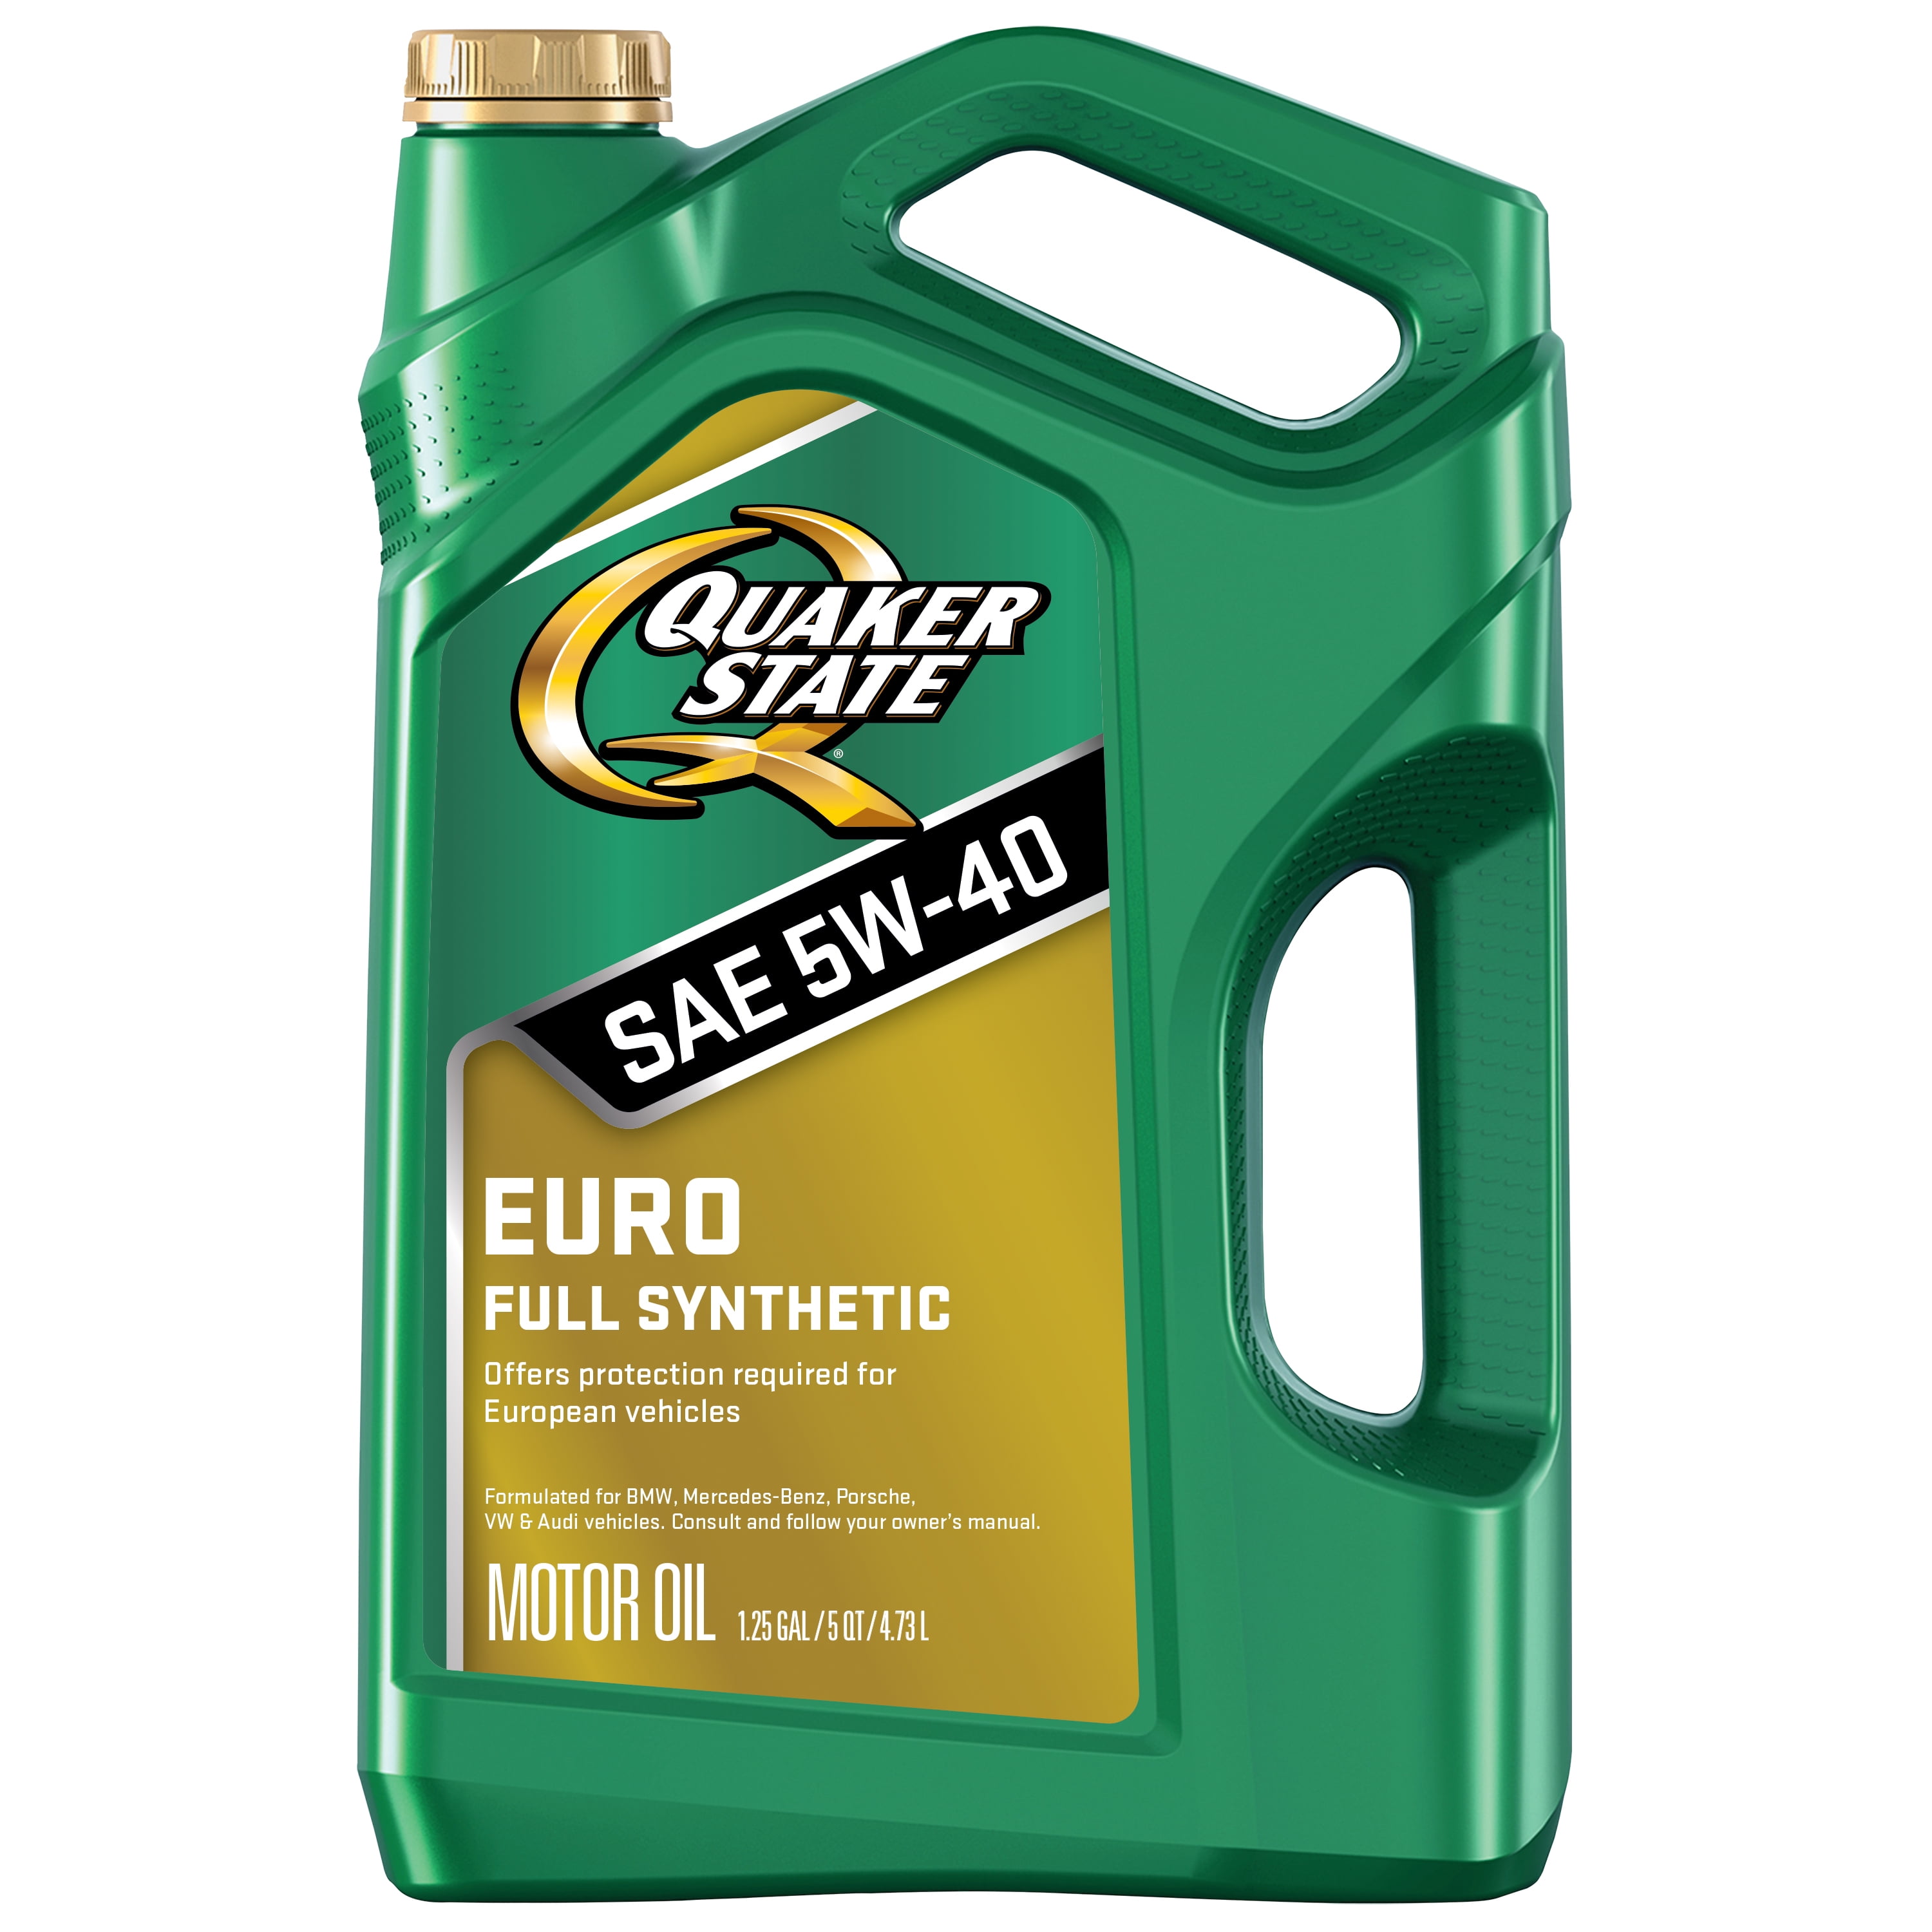 Quaker State Metal Half Oil Can Wall Decor Gas & Oil NEW 